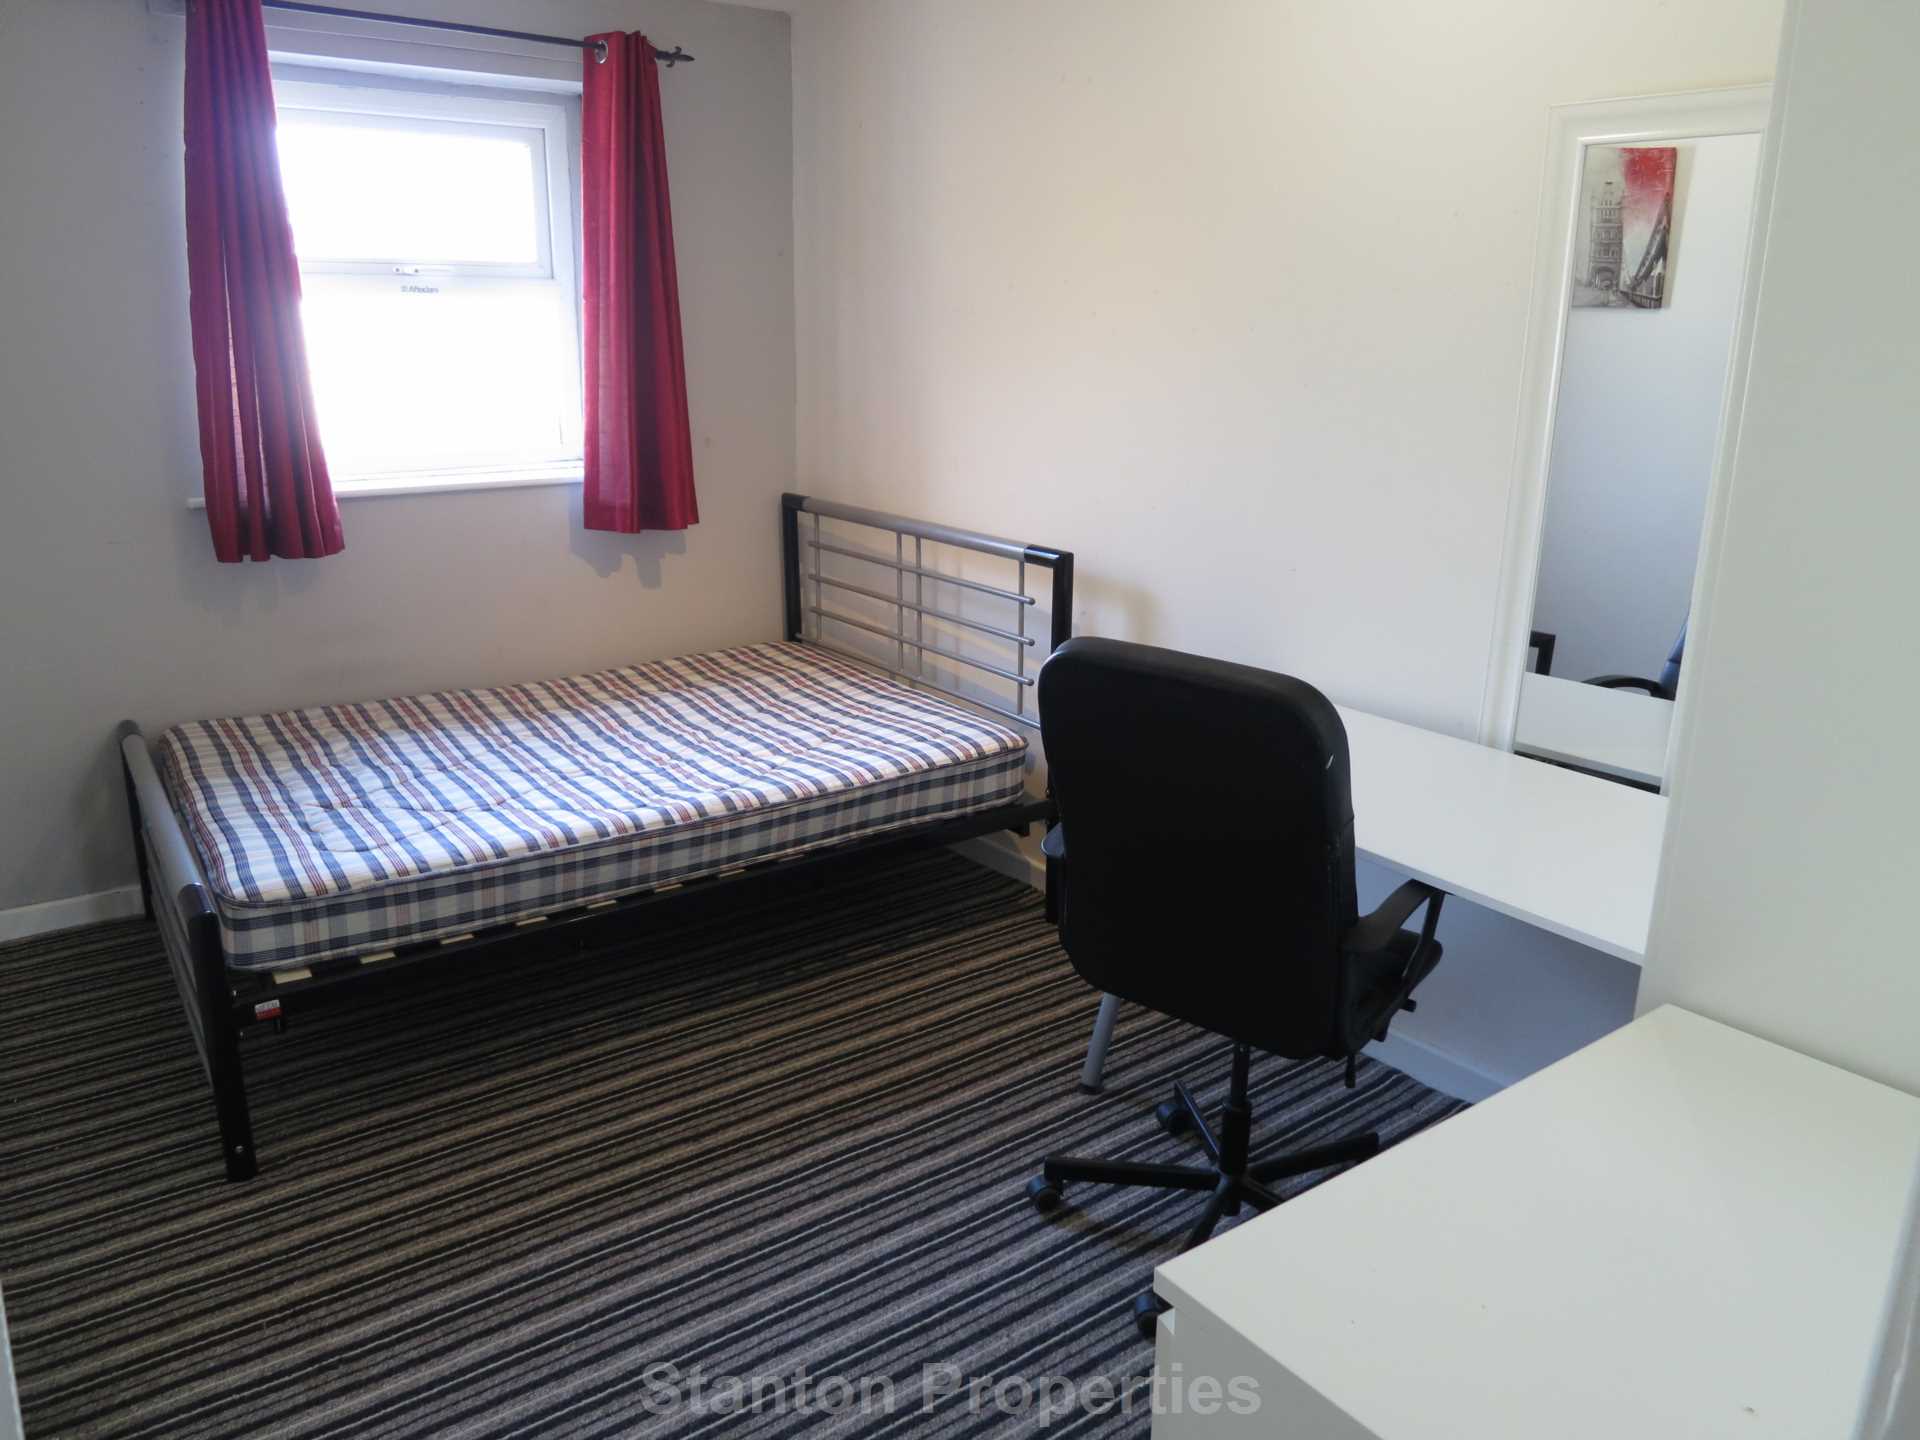 £120 pppw excluding bills, Copson Street, Withington, Image 7